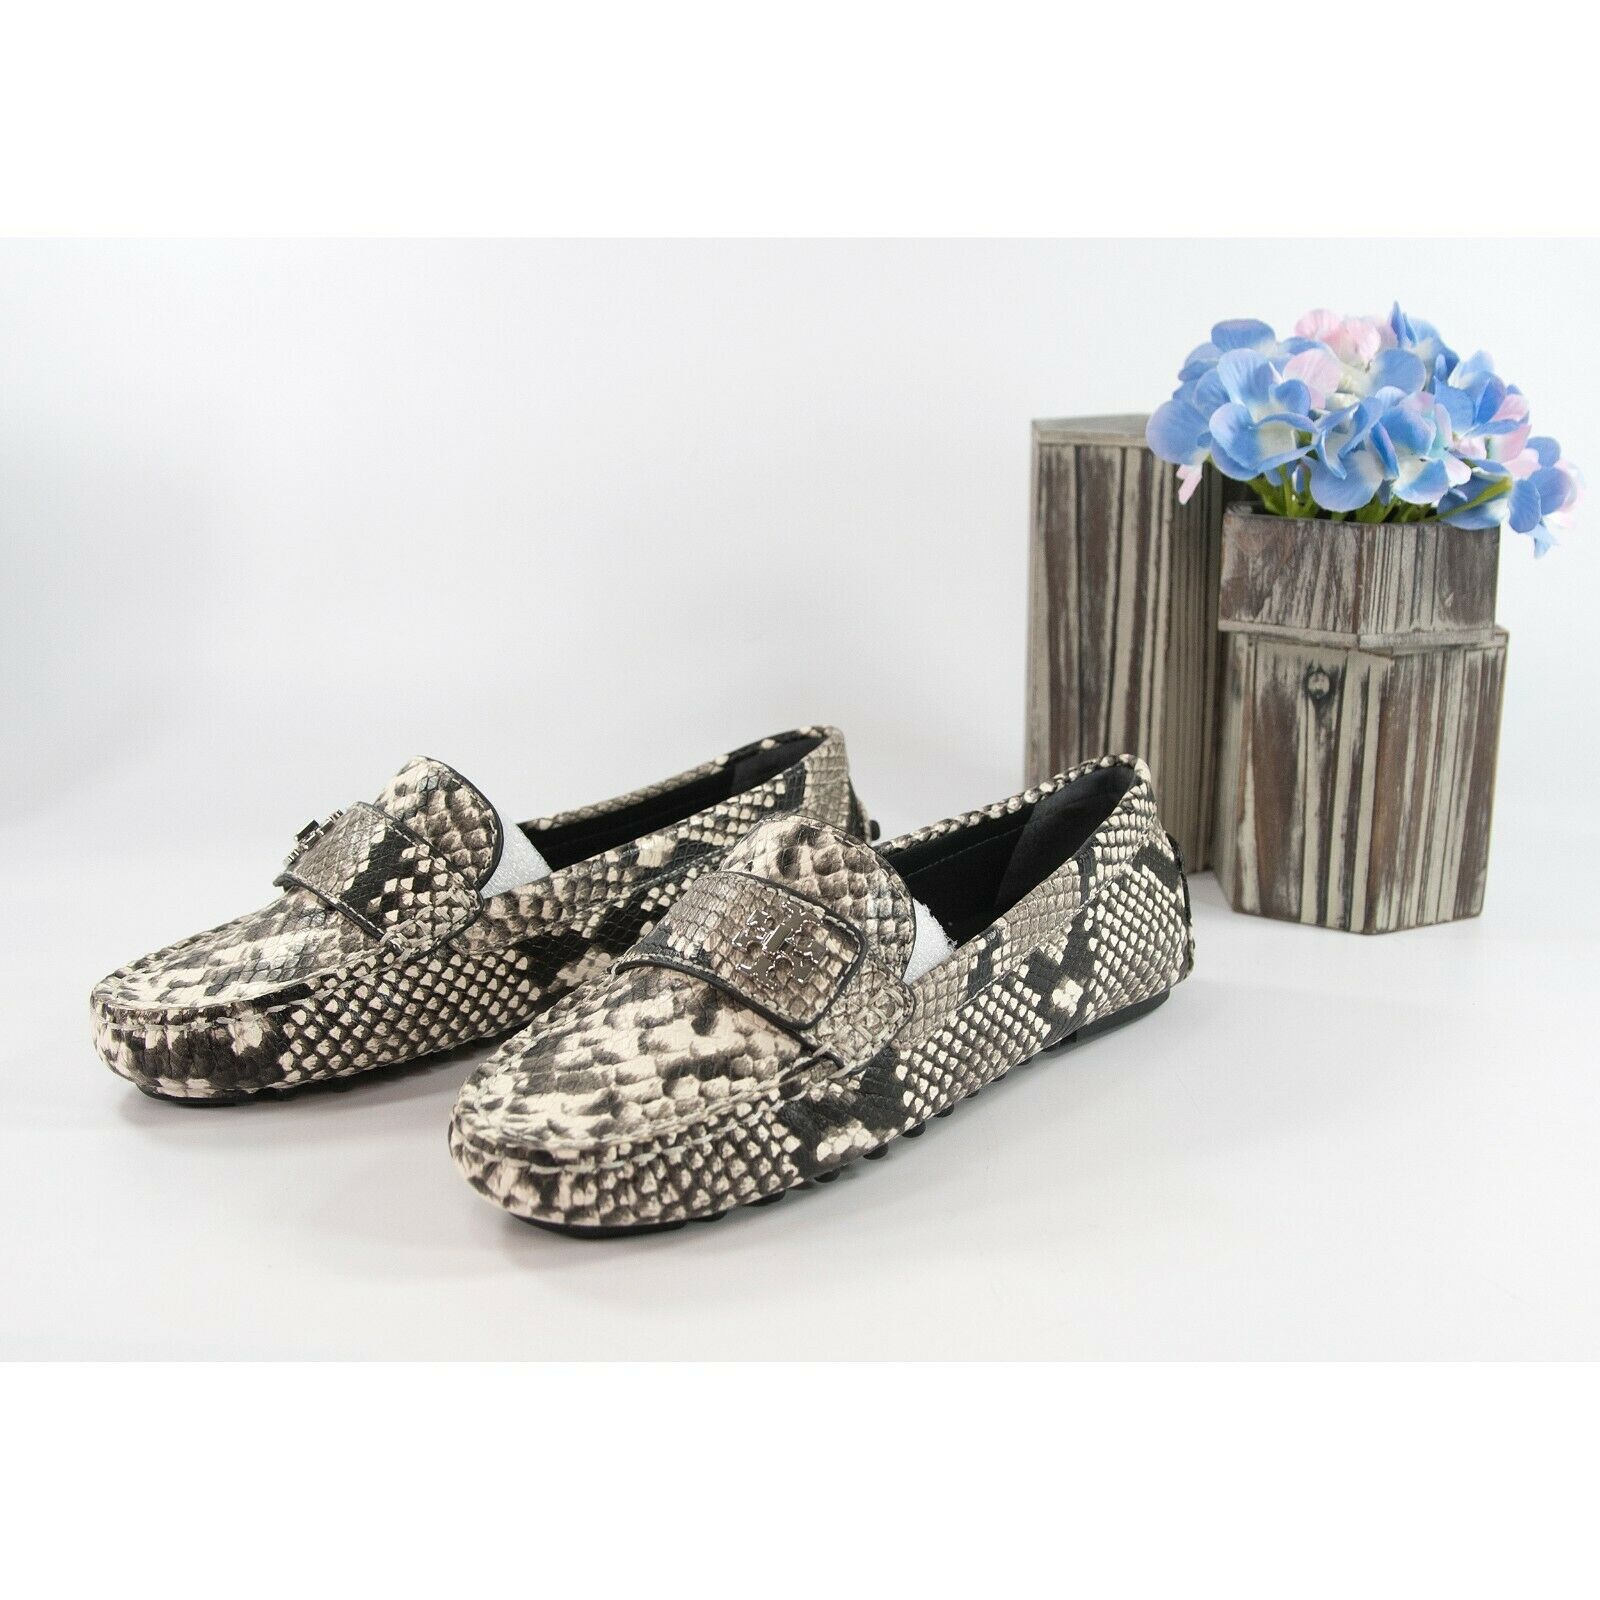 Tory Burch Kira Warm Roccio Snake Leather Driver Moccasin Flats Sz 6 N –  Design Her Boutique